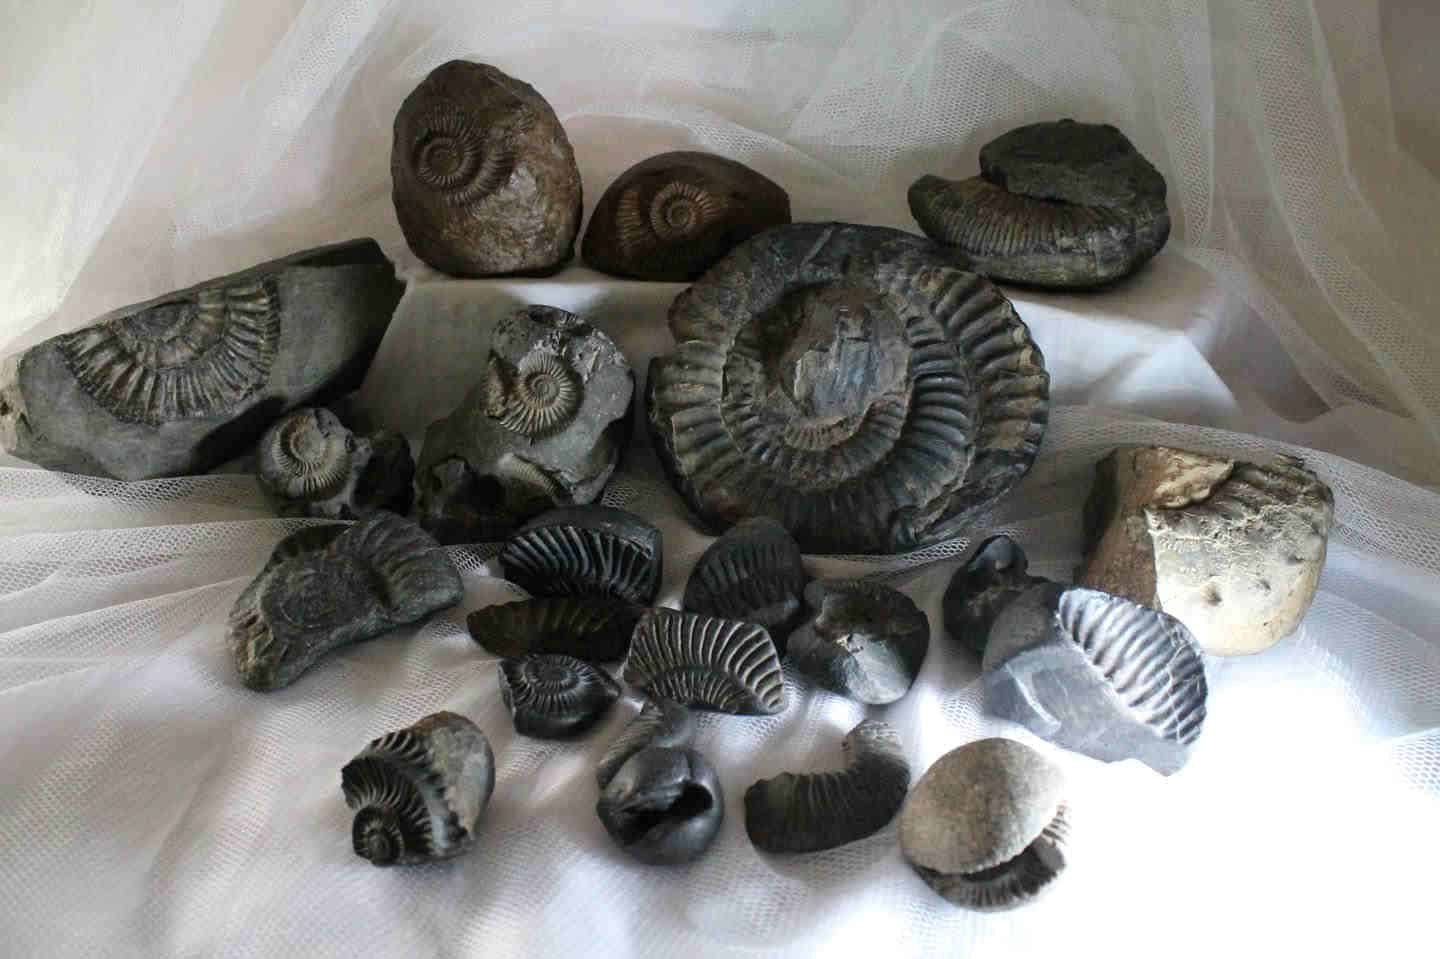 Fossils of Ammonites, a type of mollusk that lived during the time of the dinosaurs, can be found in Mansalay, Oriental Mindoro—the Jurassic Park of the Philippines.